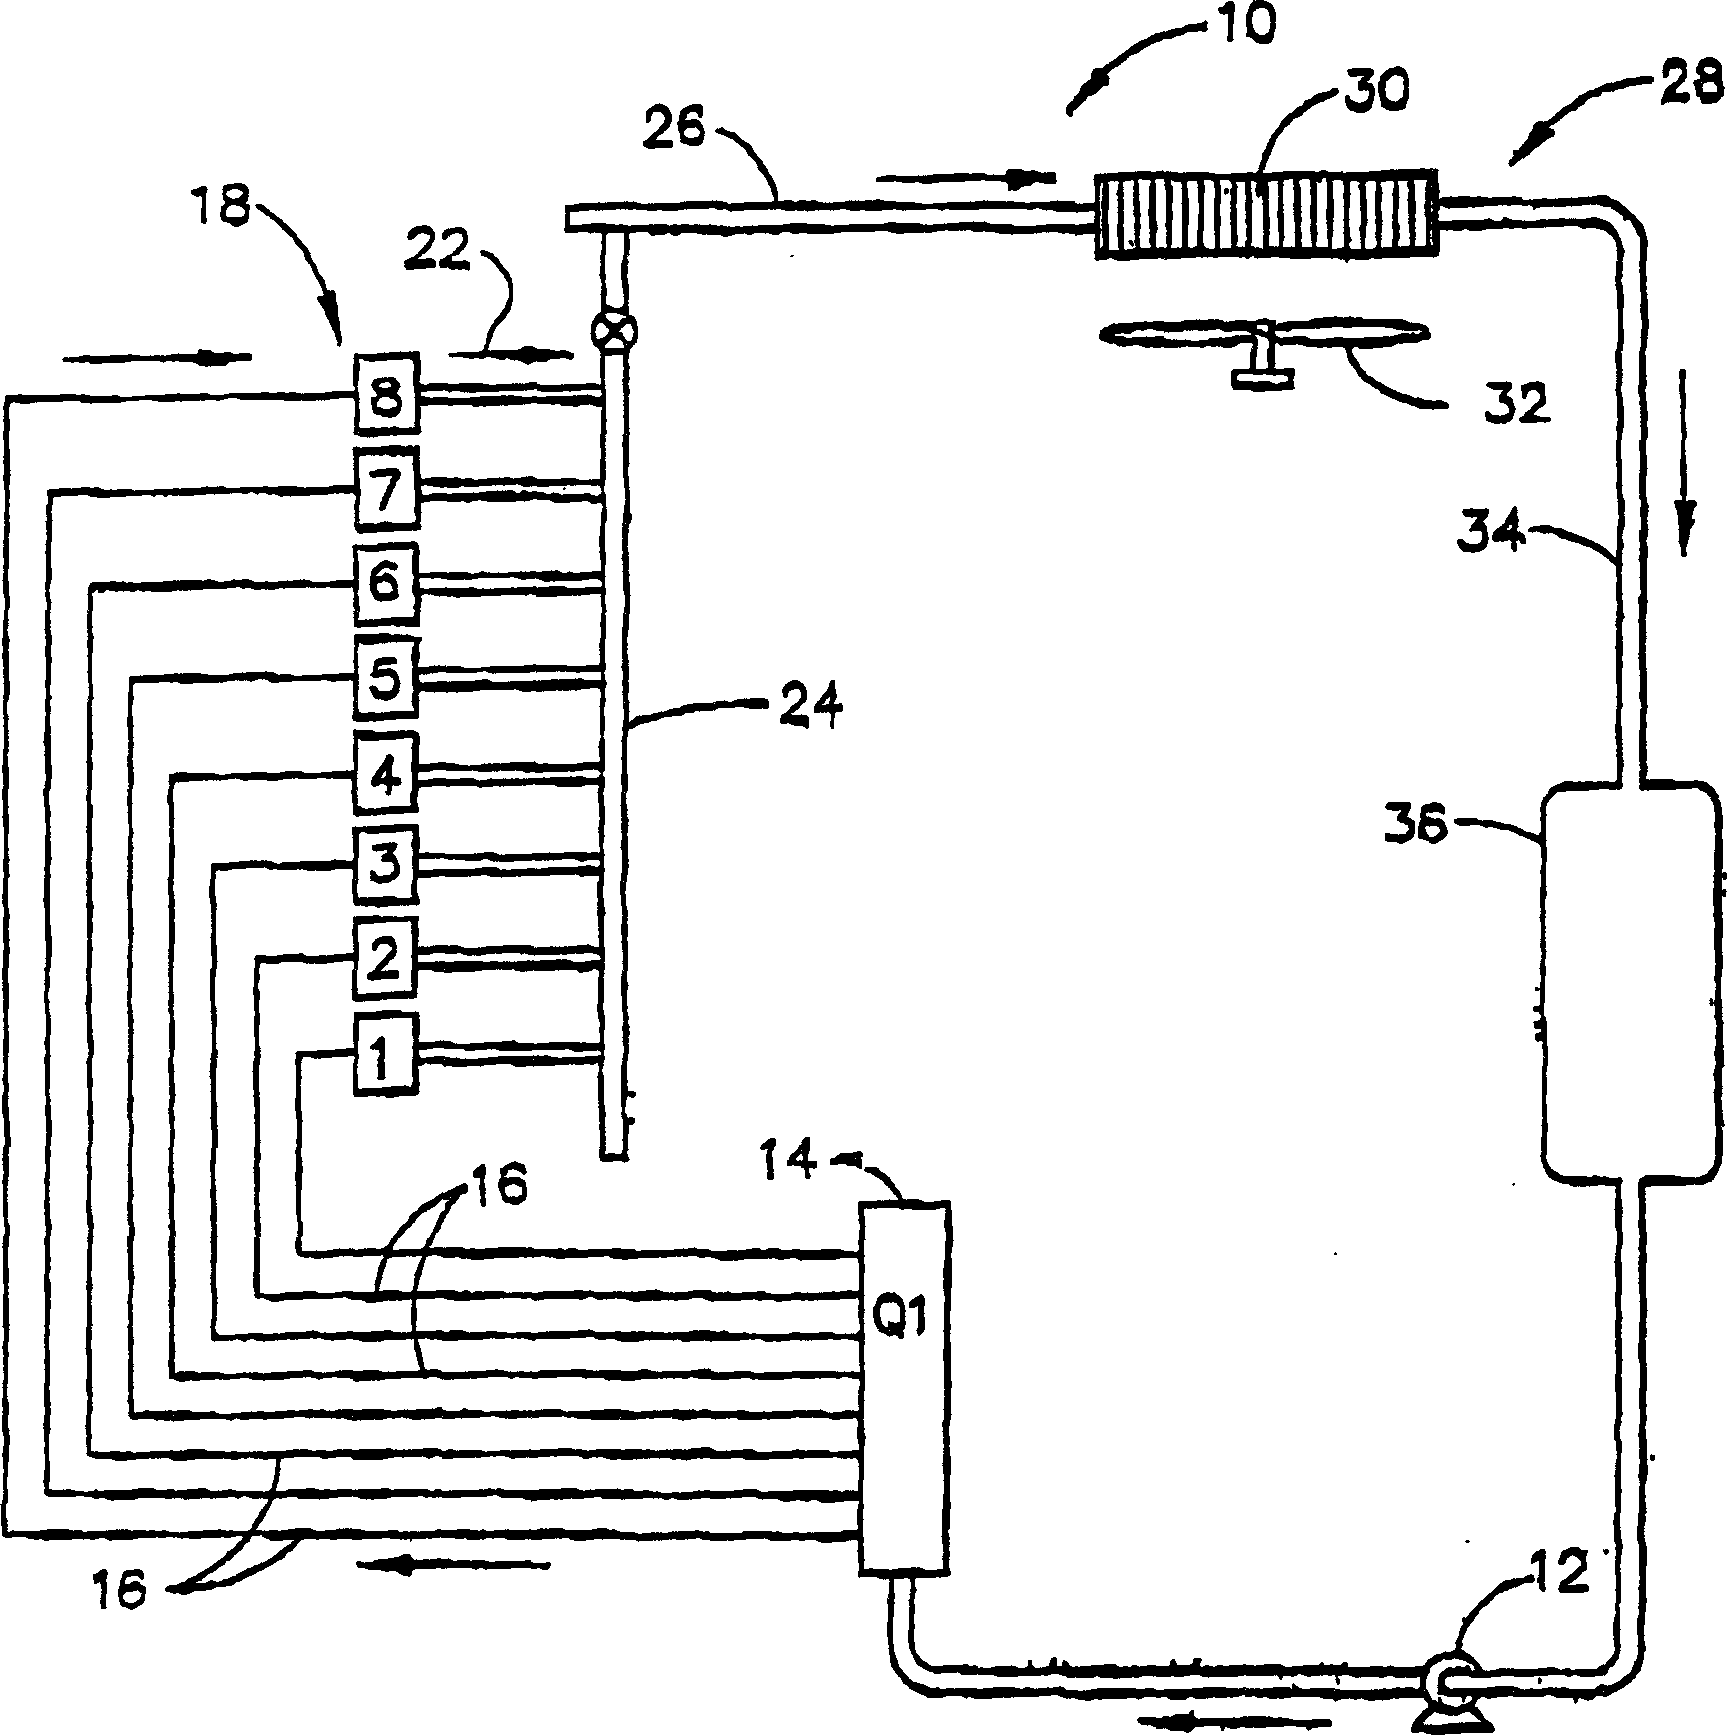 Pumped liquid cooling system using a phase change refrigerant